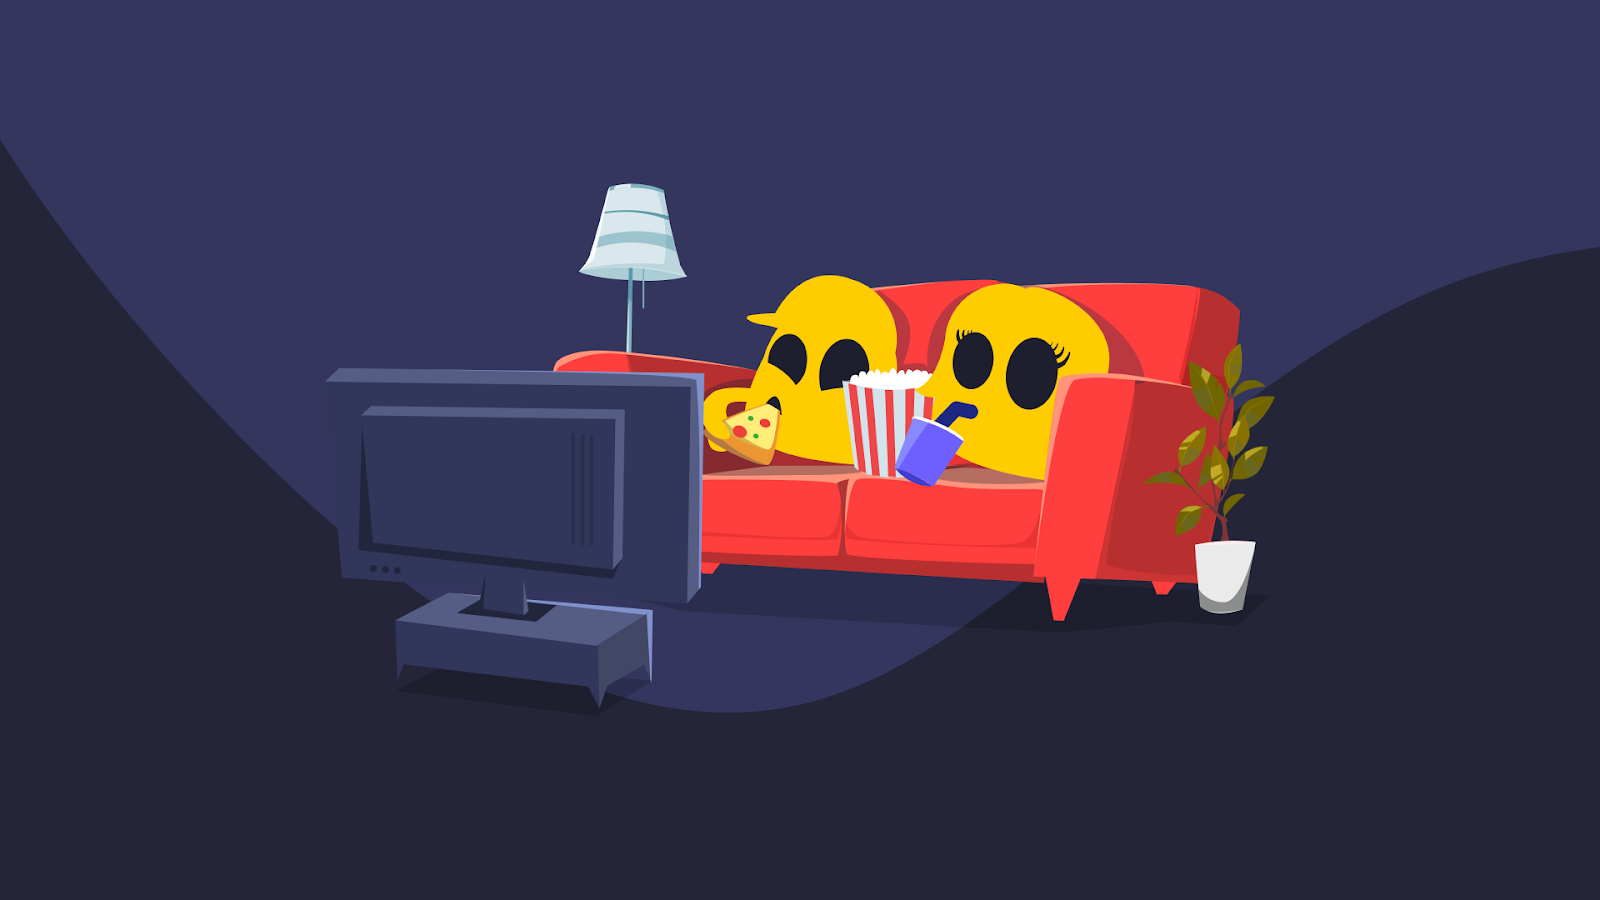 Image of Ghosties on a couch watching a movie on the TV.